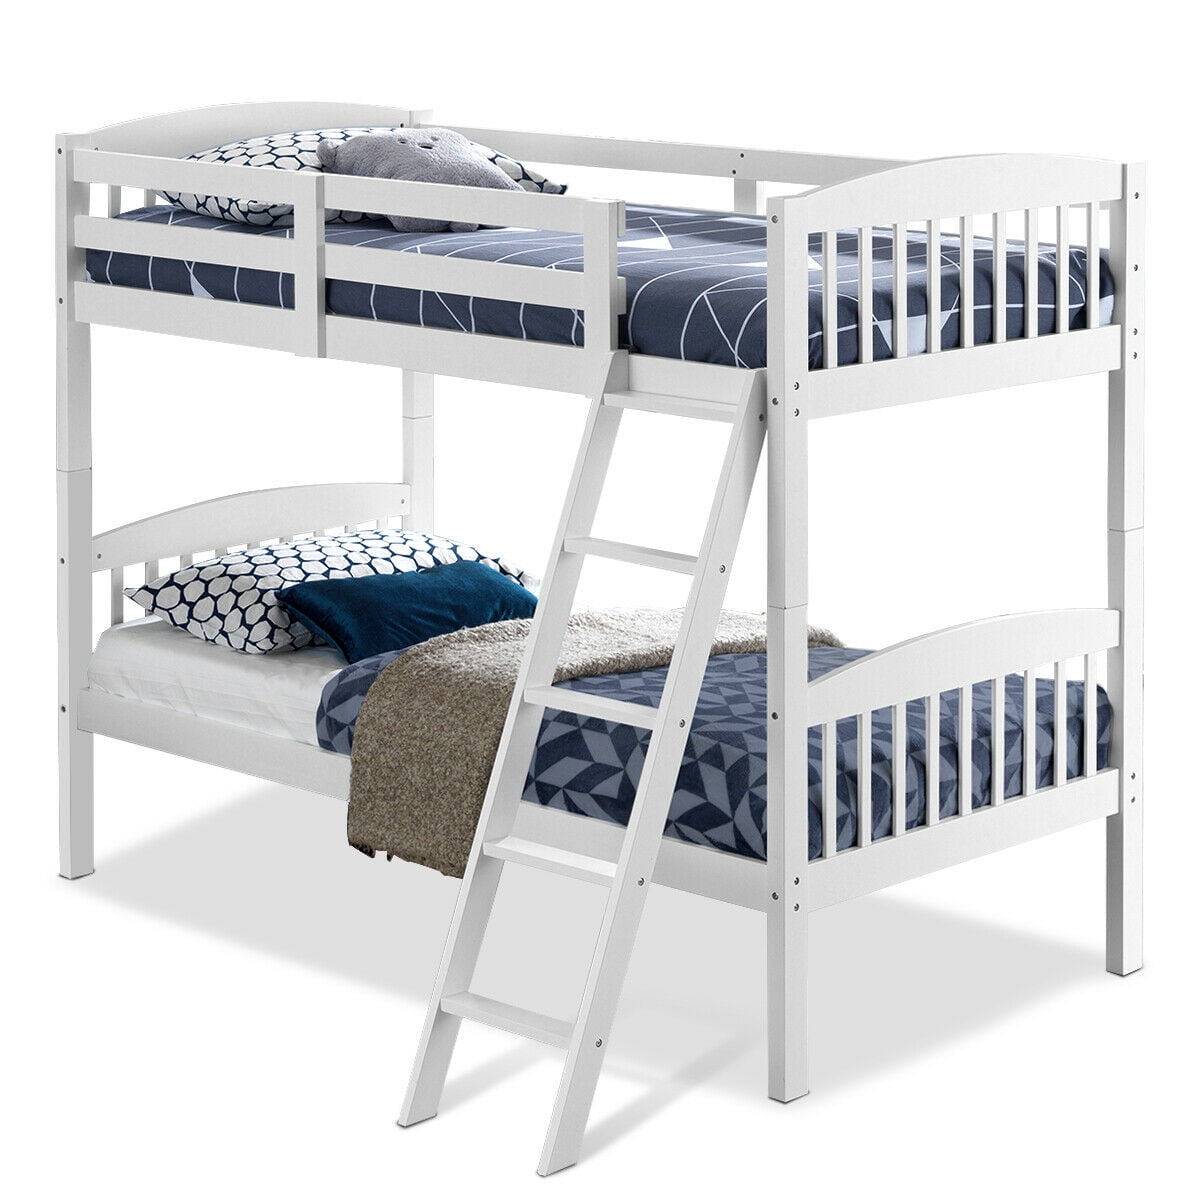 Gymax Wood Hardwood Twin Bunk Bed, White Wooden Bunk Beds With Stairs